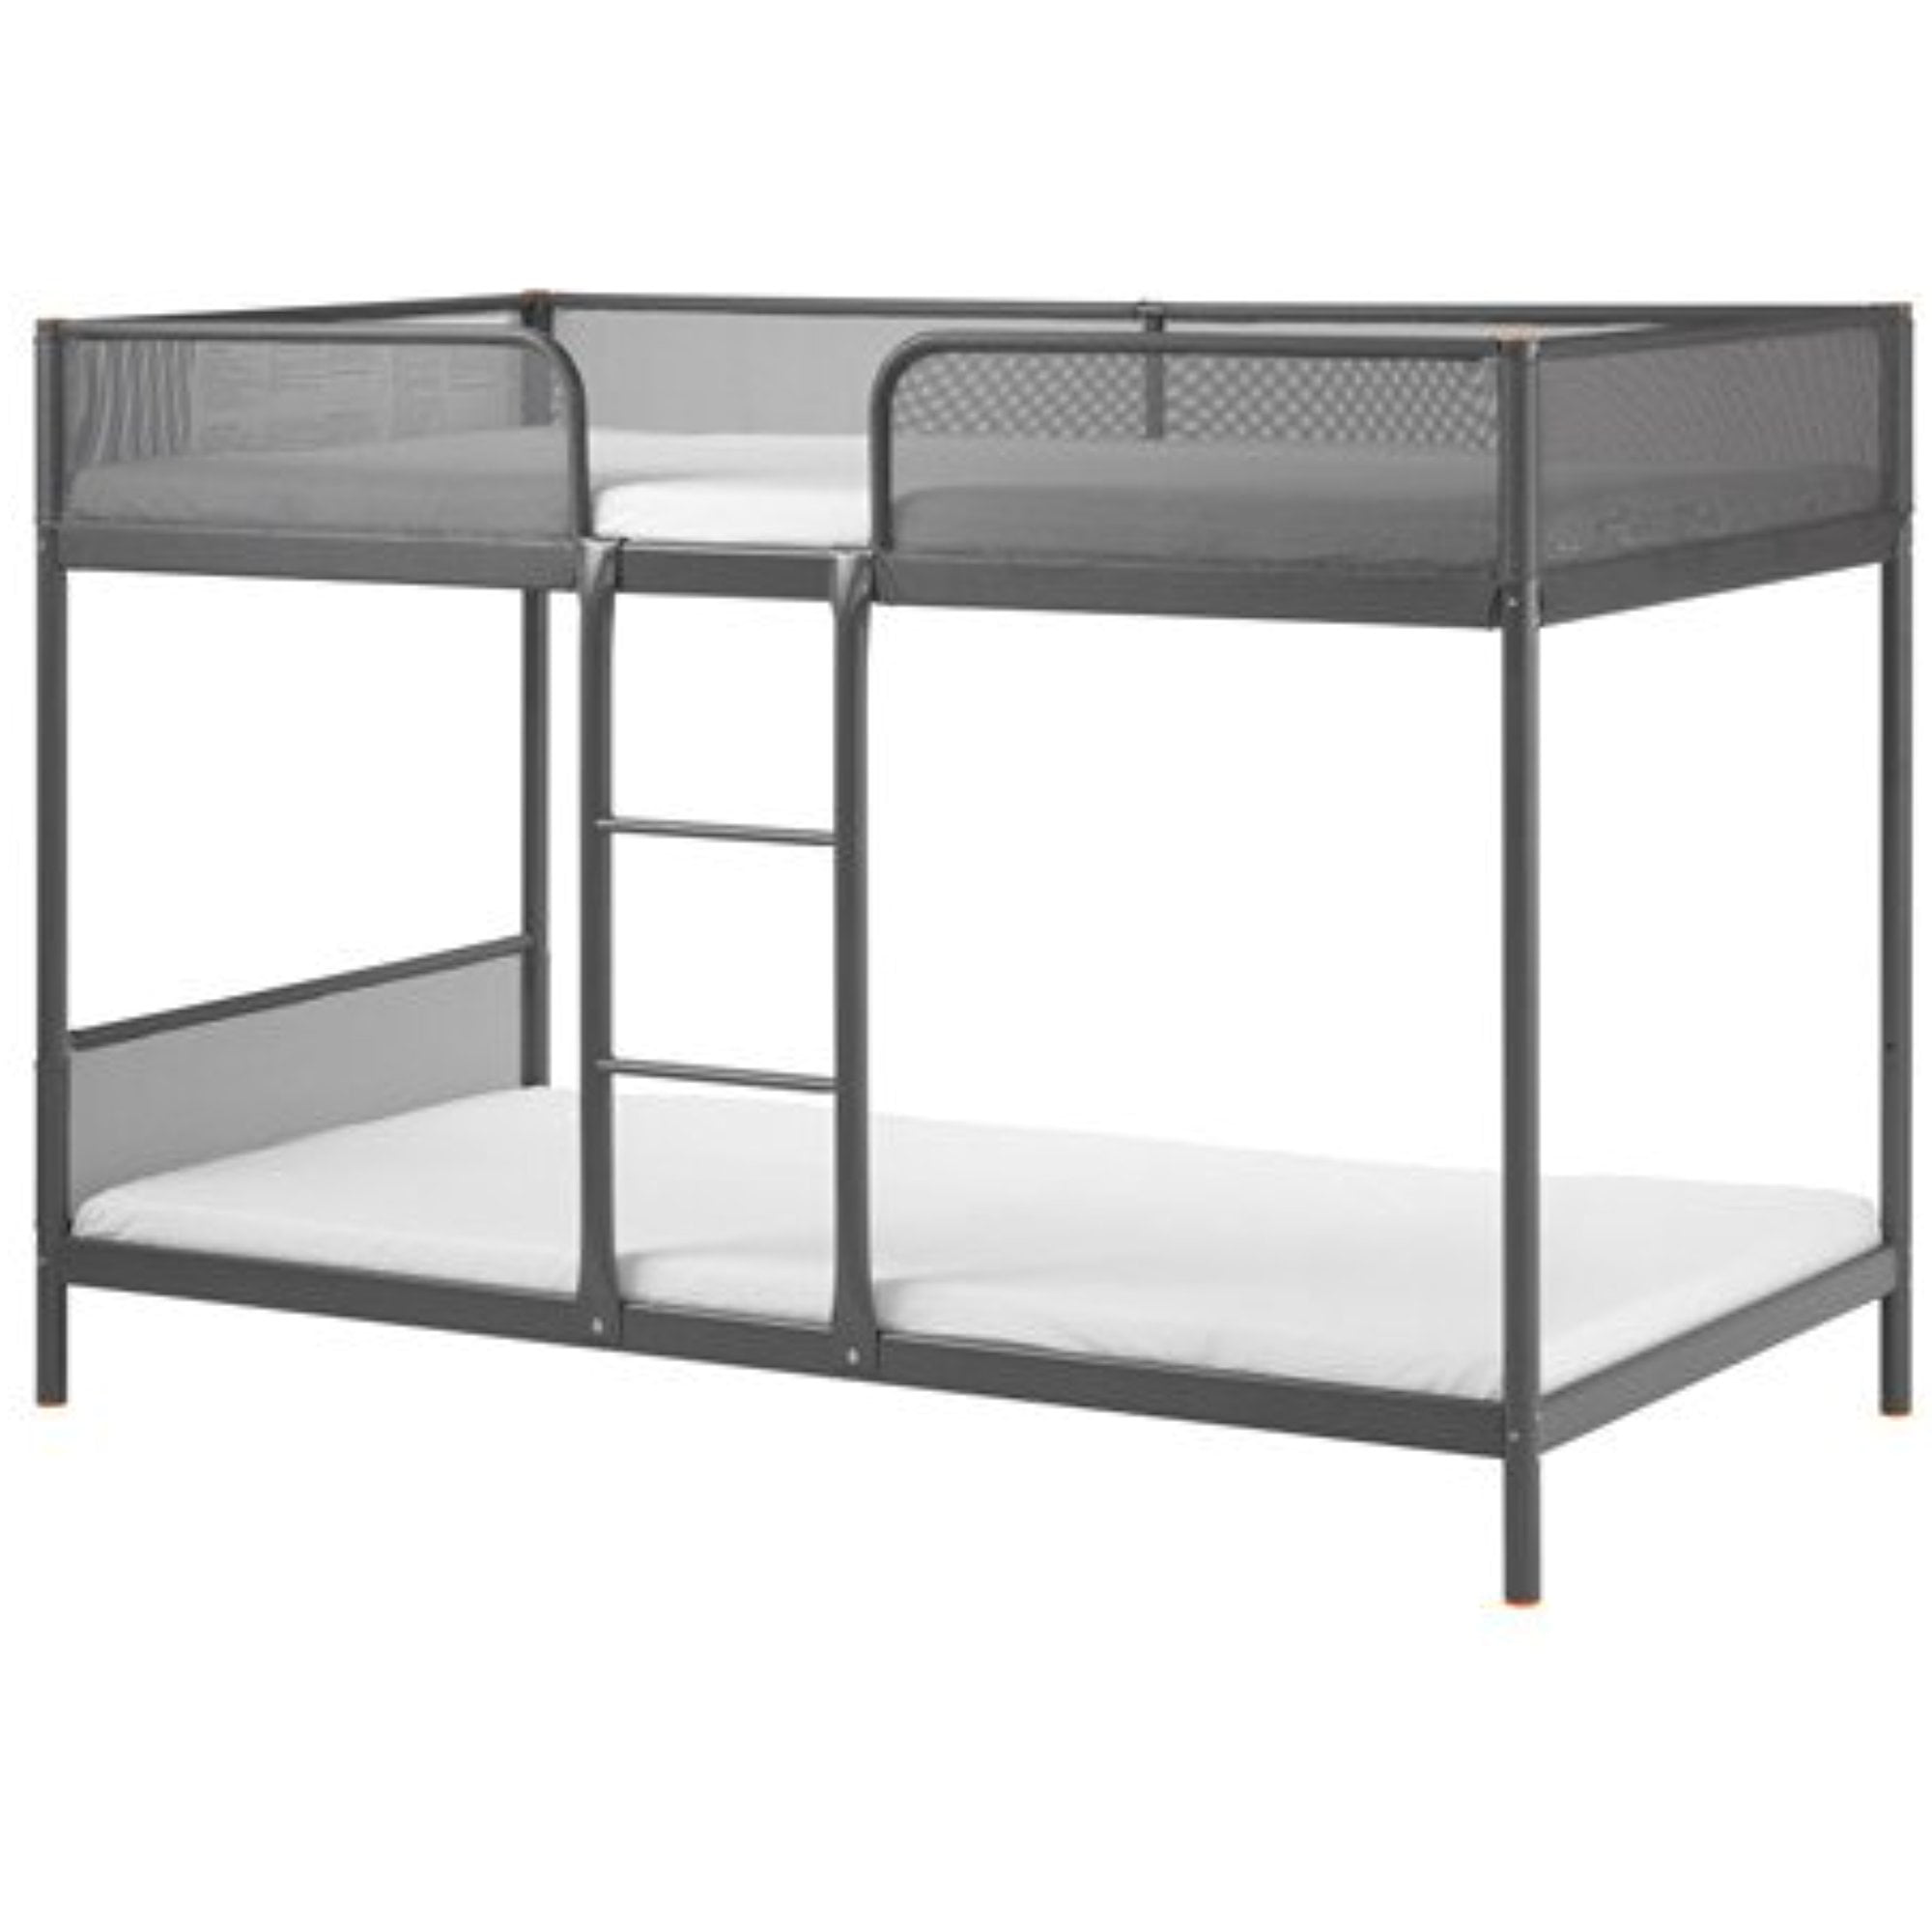 Ikea Tuffing Bunk Bed Frame 30210 29298, Ikea Double Bed Bunk